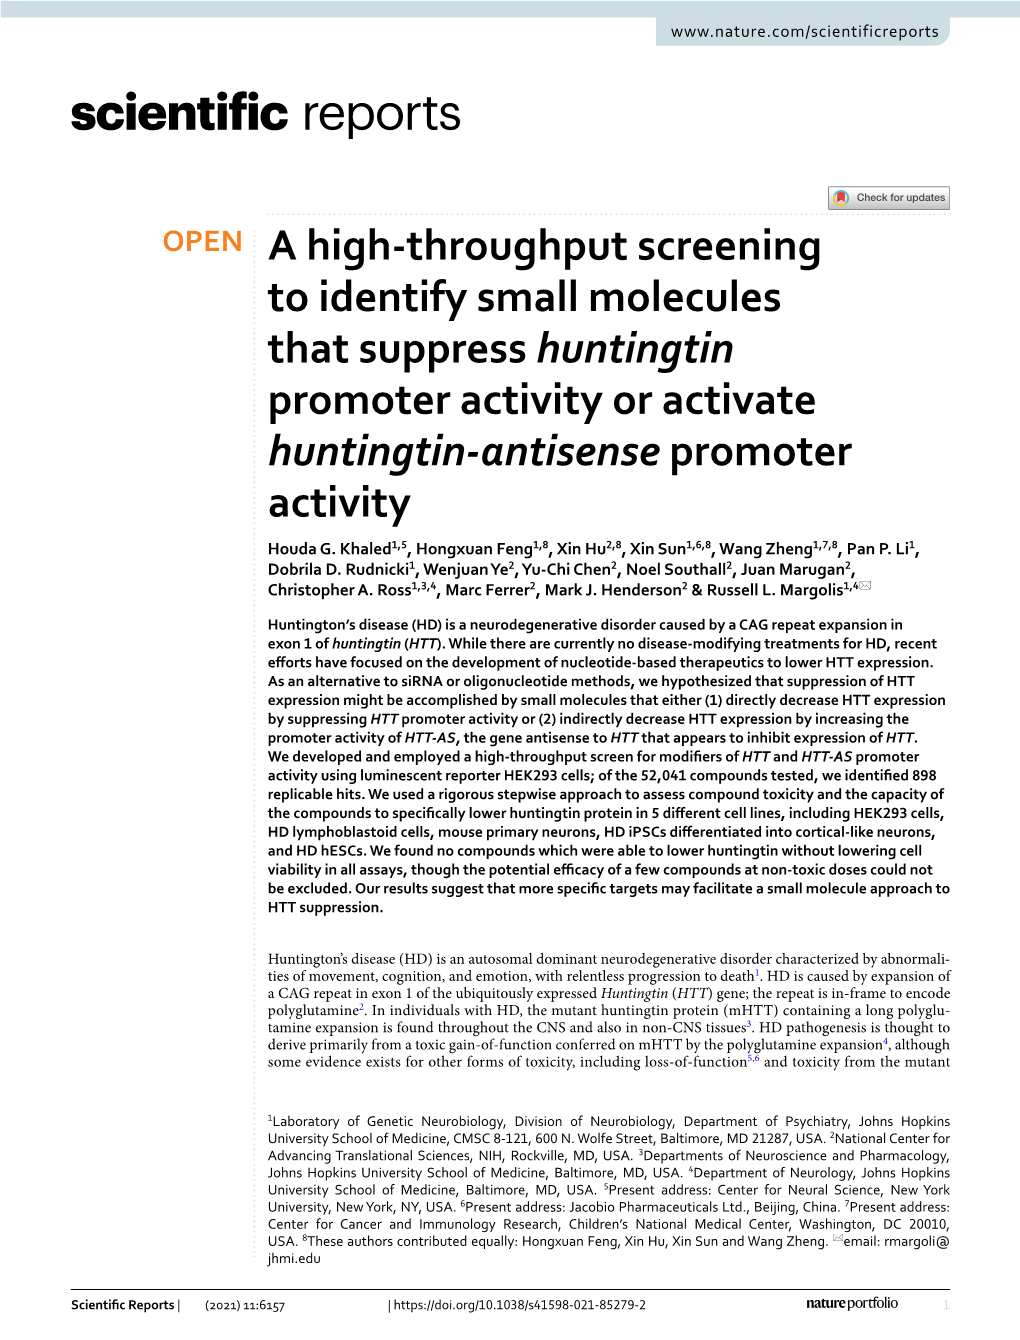 A High-Throughput Screening to Identify Small Molecules That